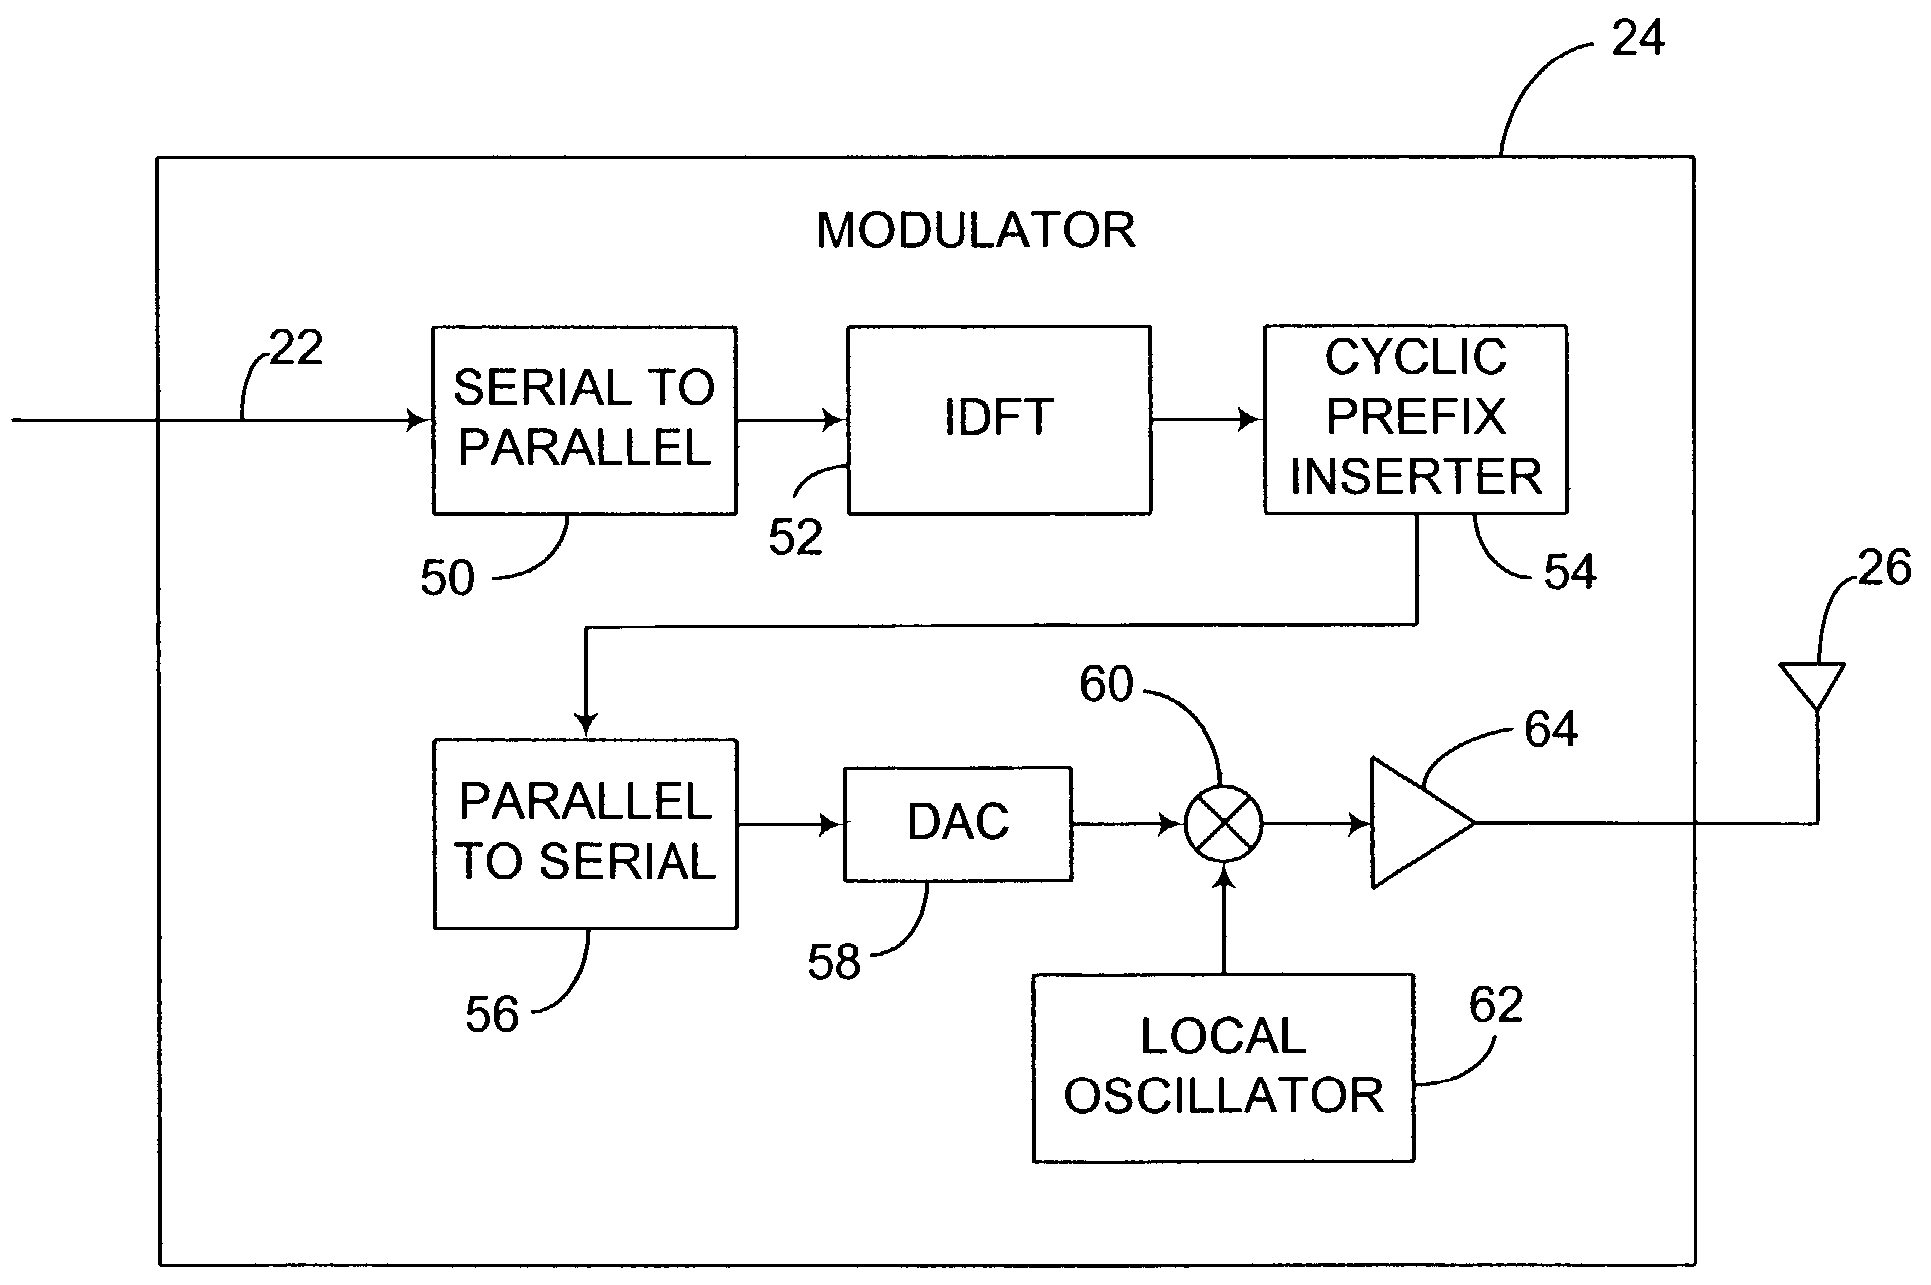 Preamble structures for single-input, single-output (SISO) and multi-input, multi-output (MIMO) communication systems